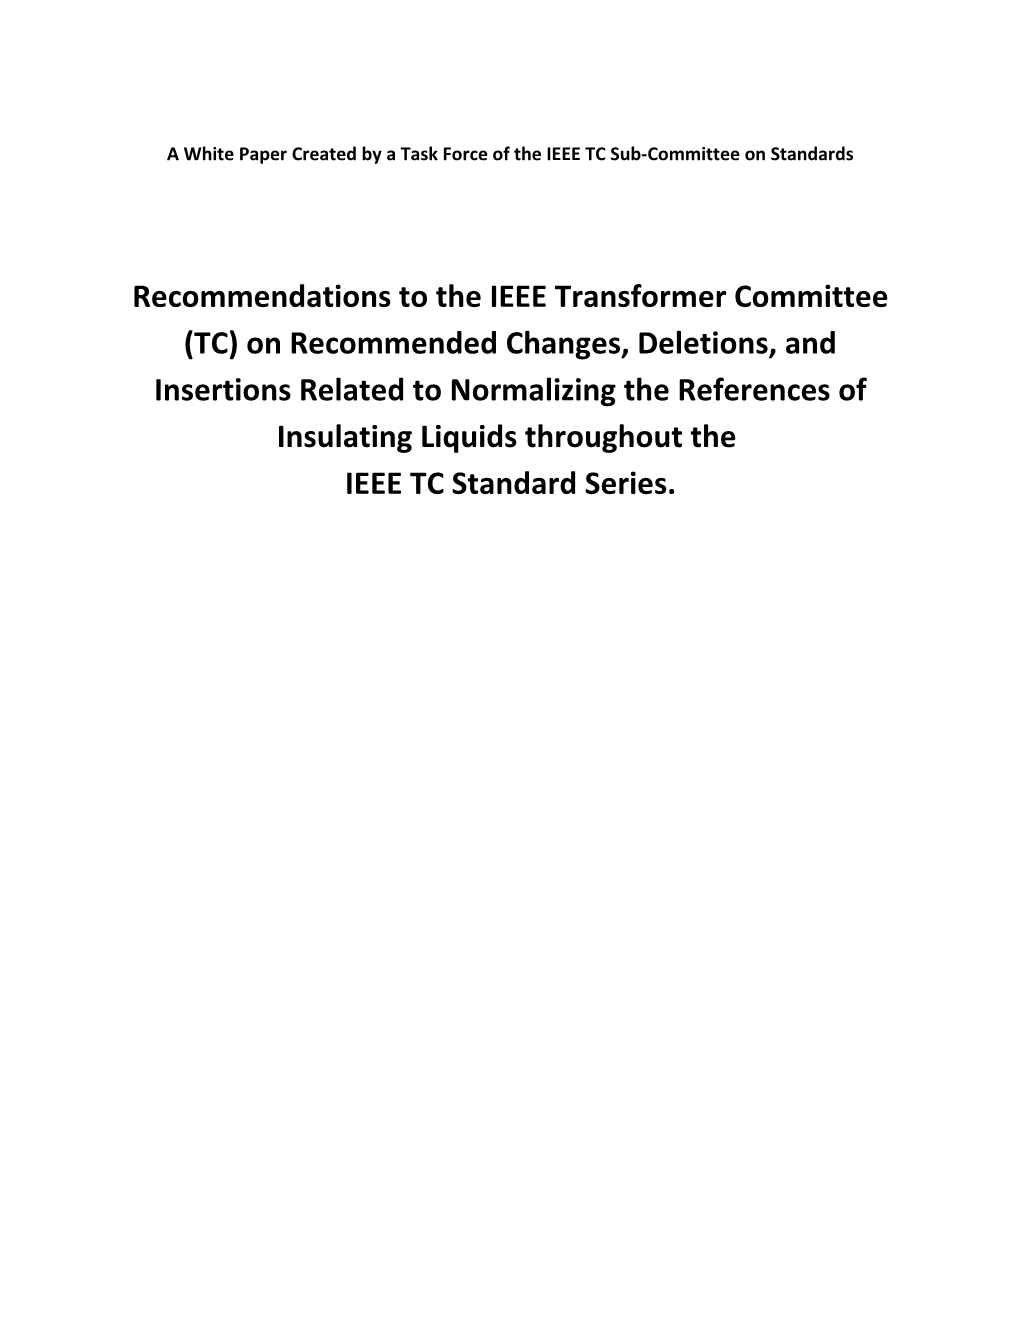 A White Paper Created by a Task Force of the IEEE TC Sub-Committee on Standards